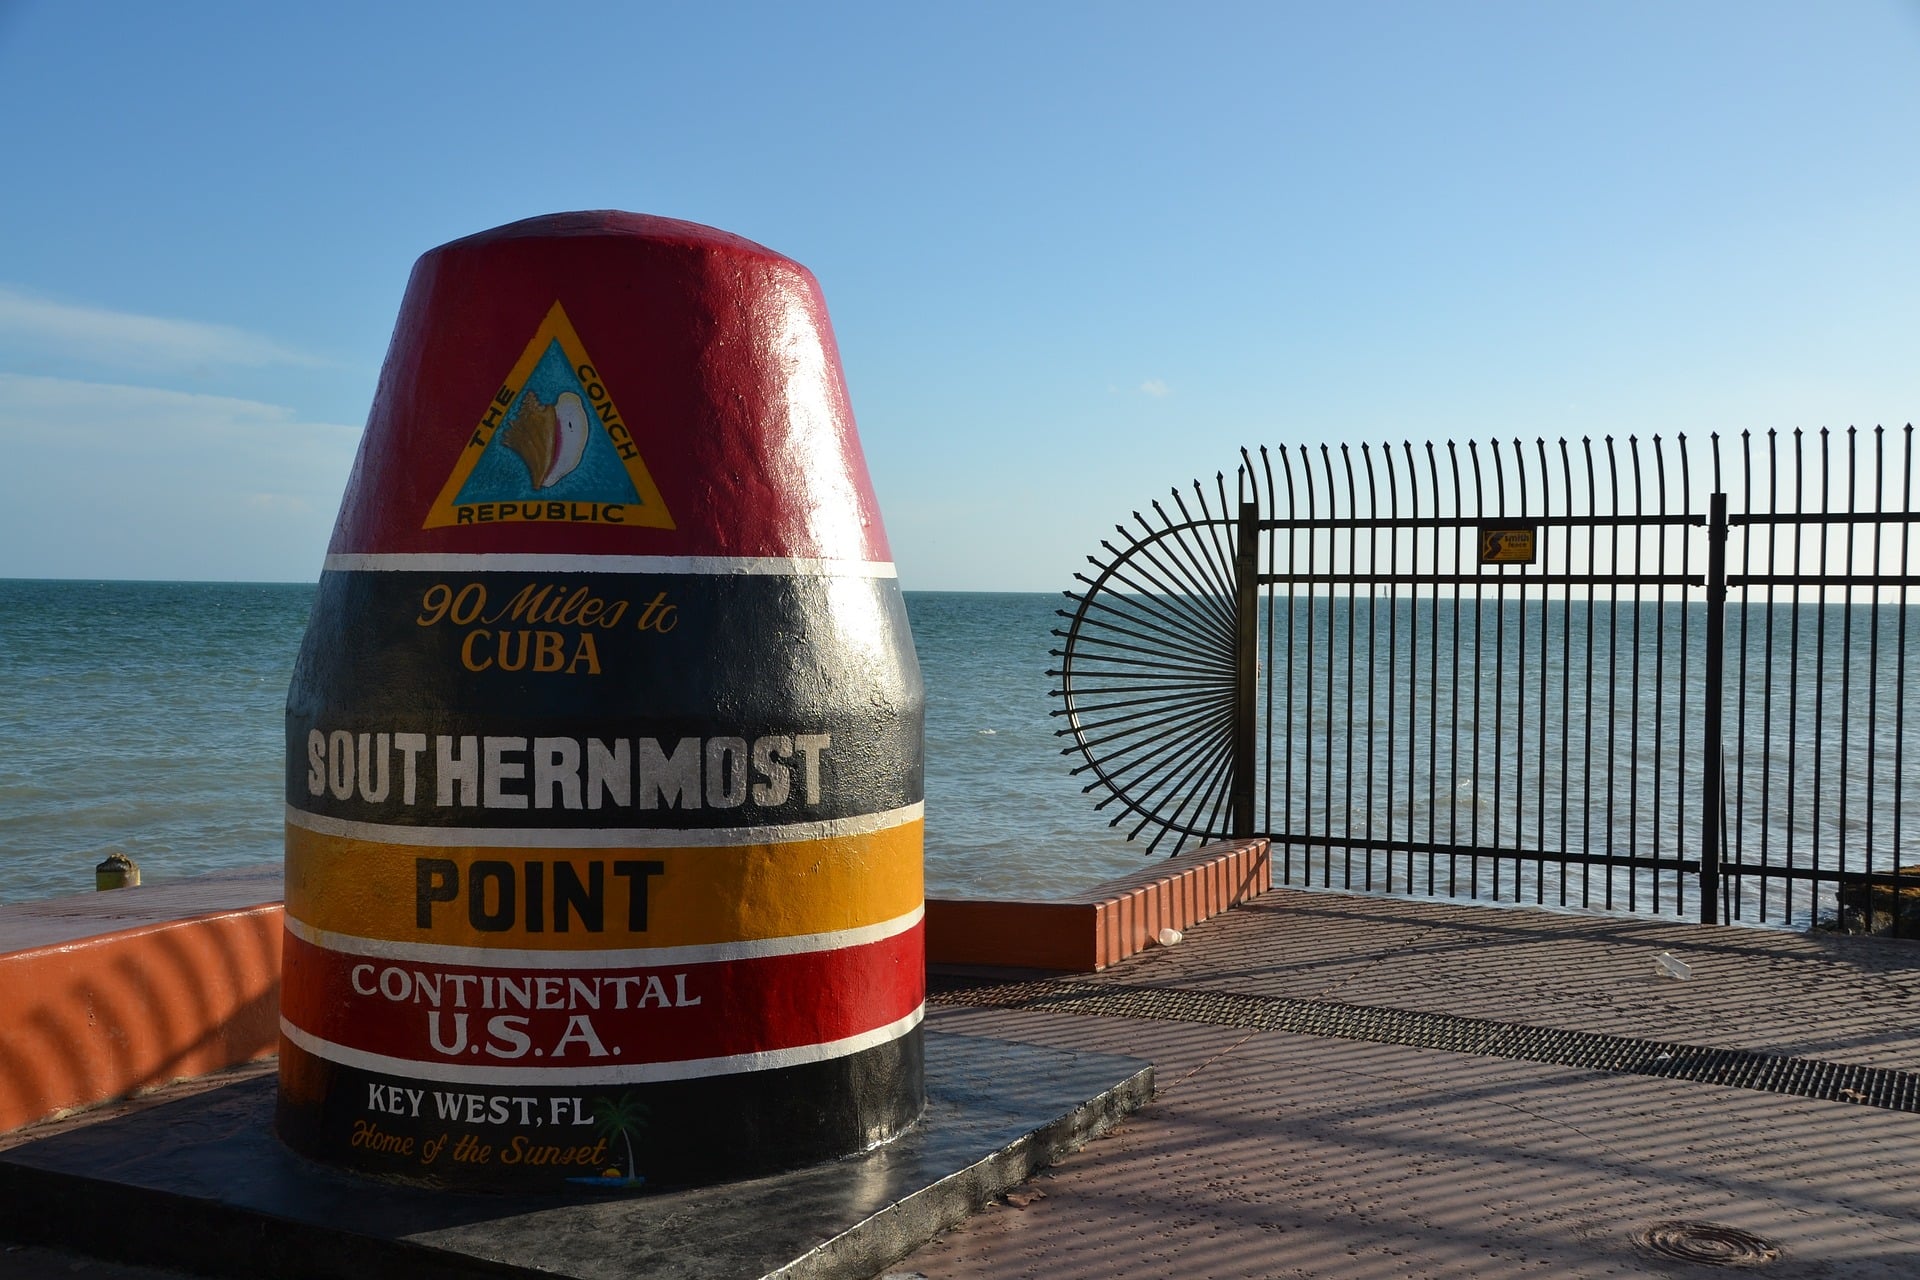 Key West was the top Florida town in the ranking.